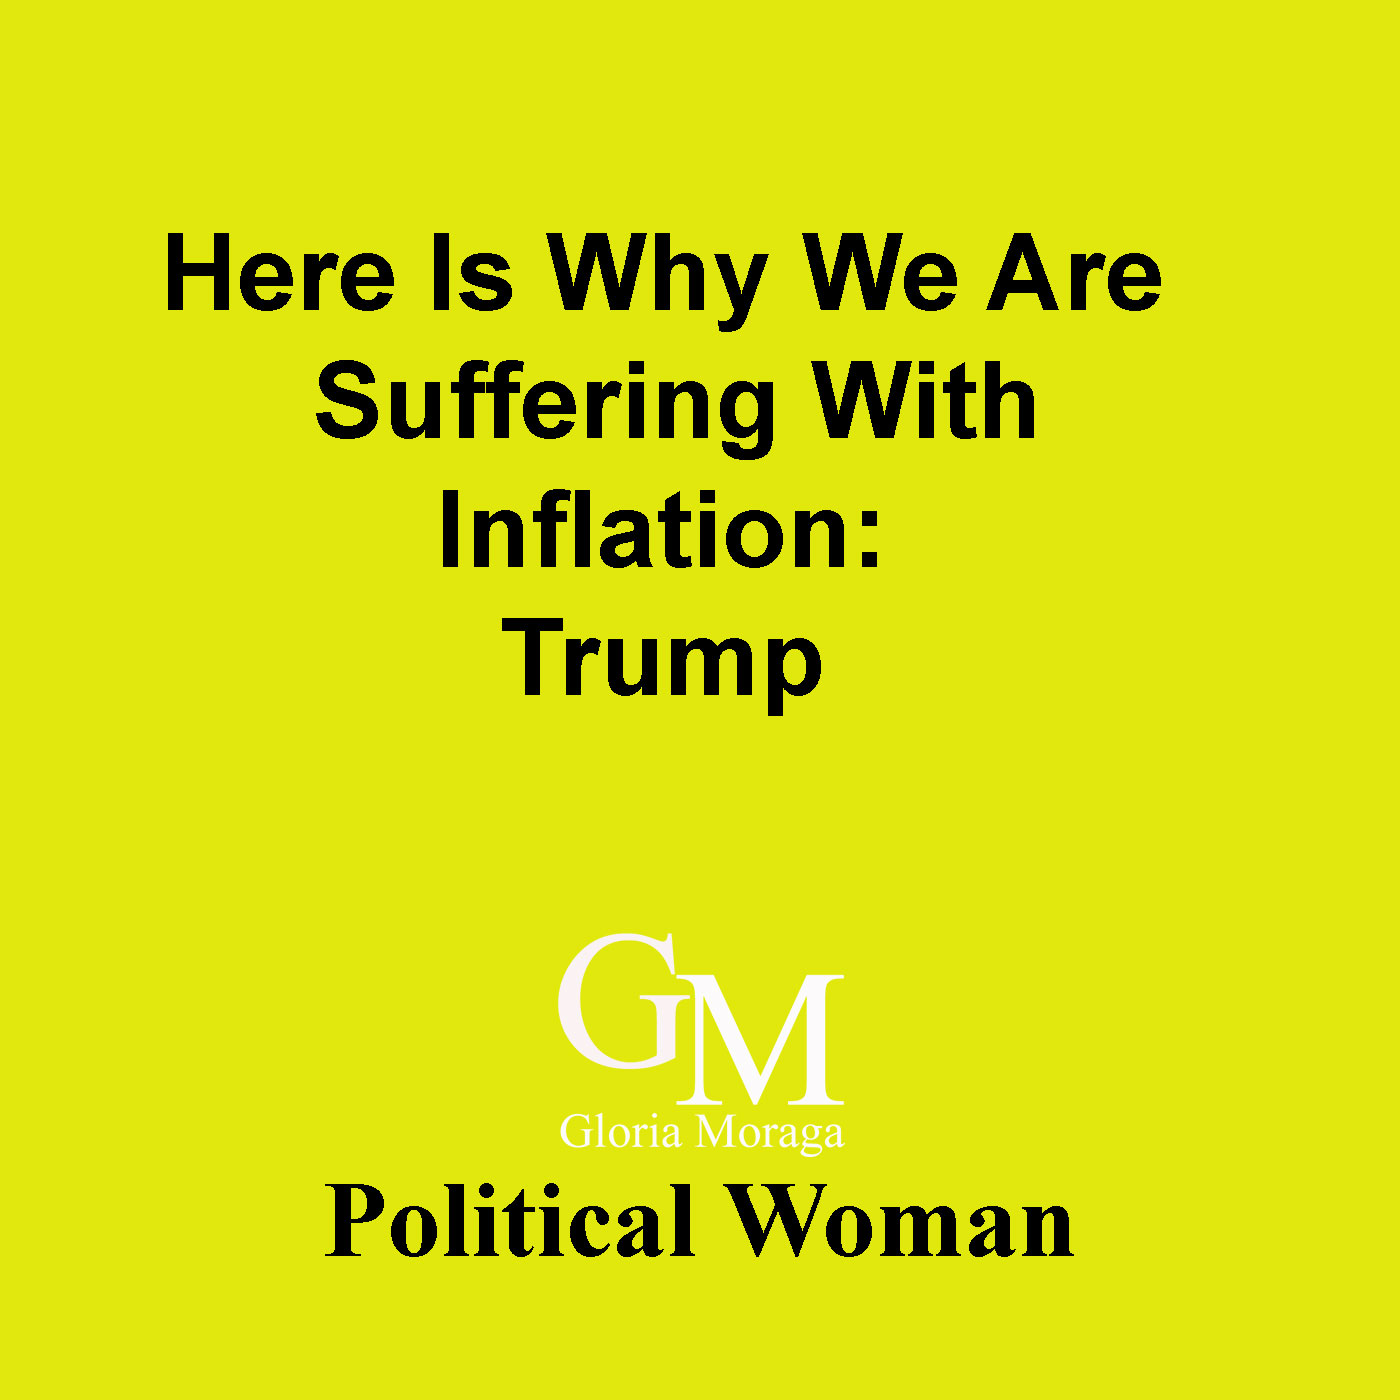 Here is why we are suffering with Inflation: Trump